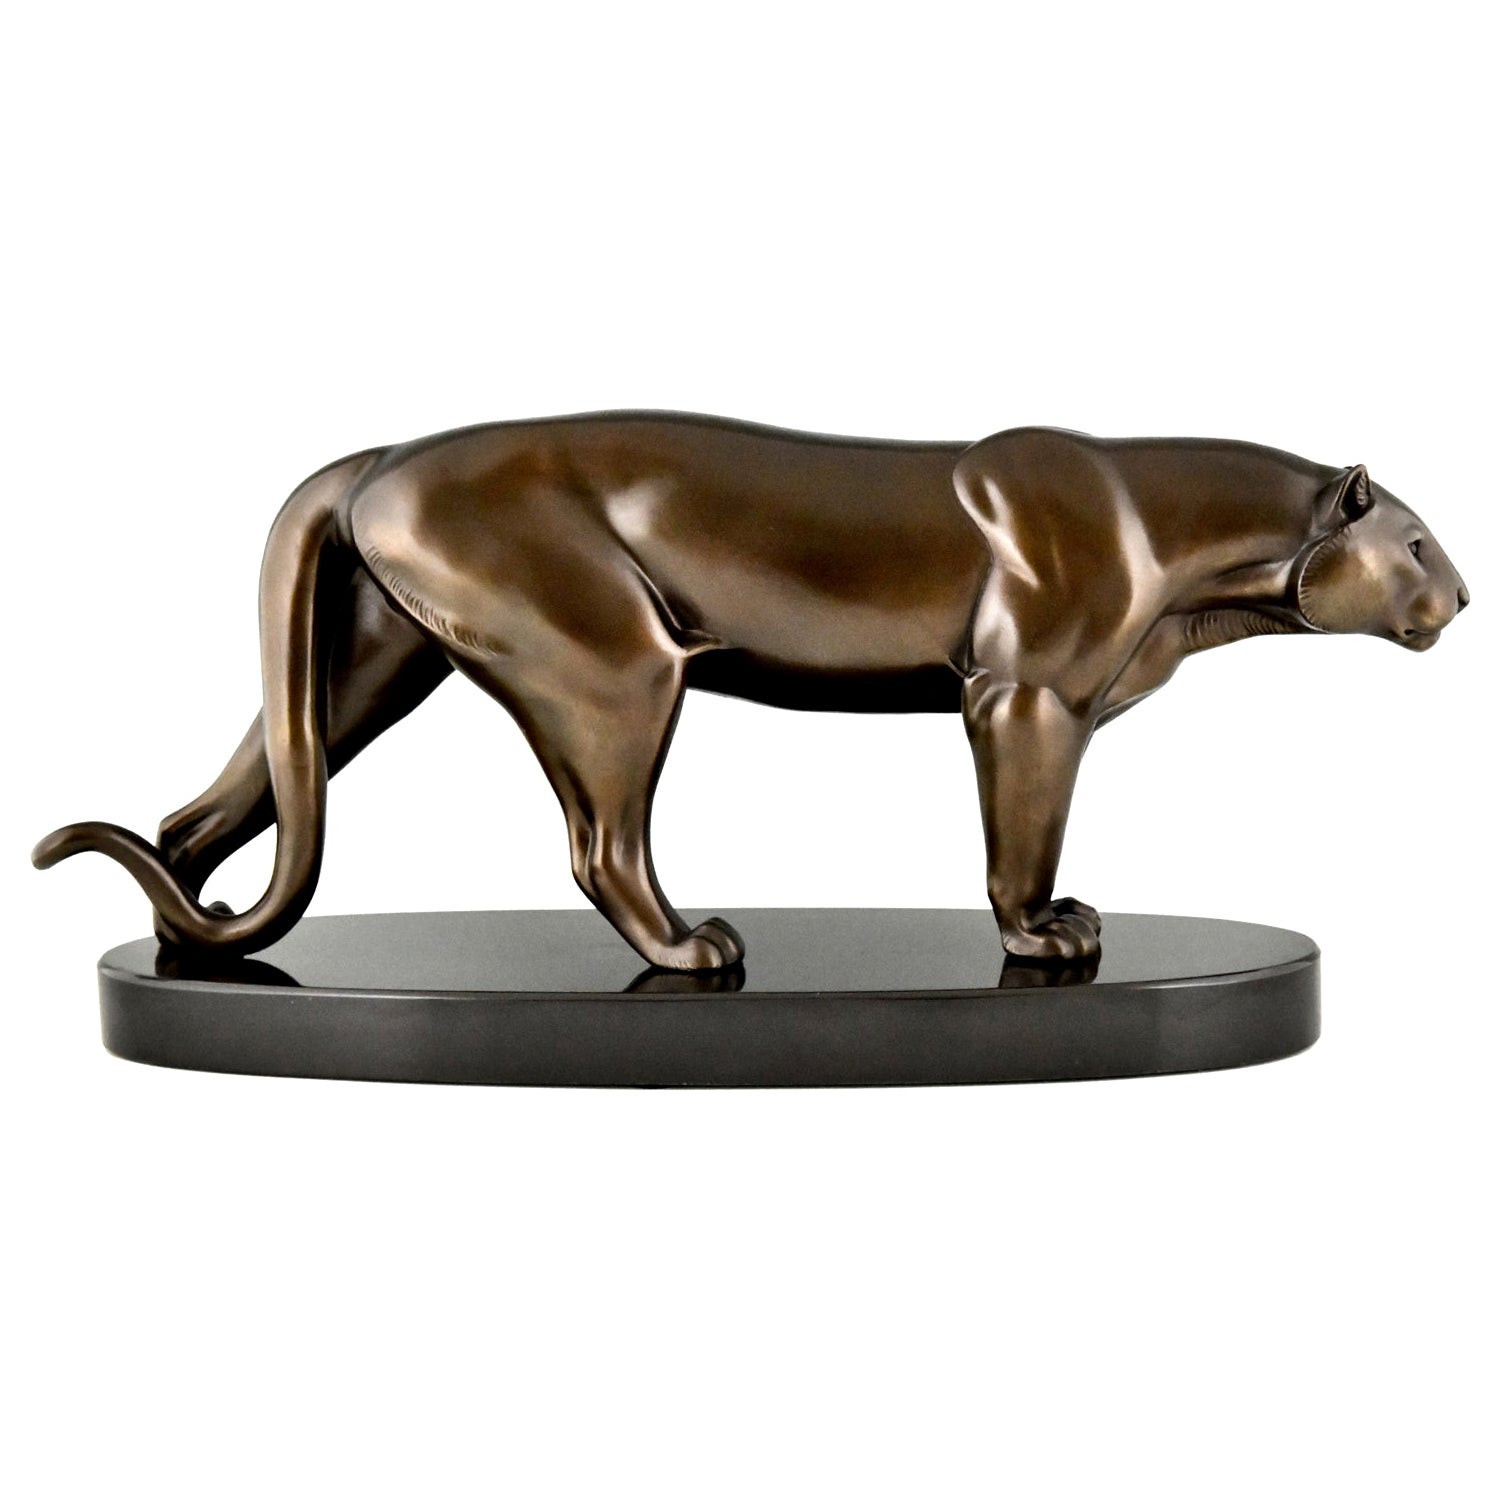 Art Deco Sculpture of a Panther on Marble Base by Rulas France 1930